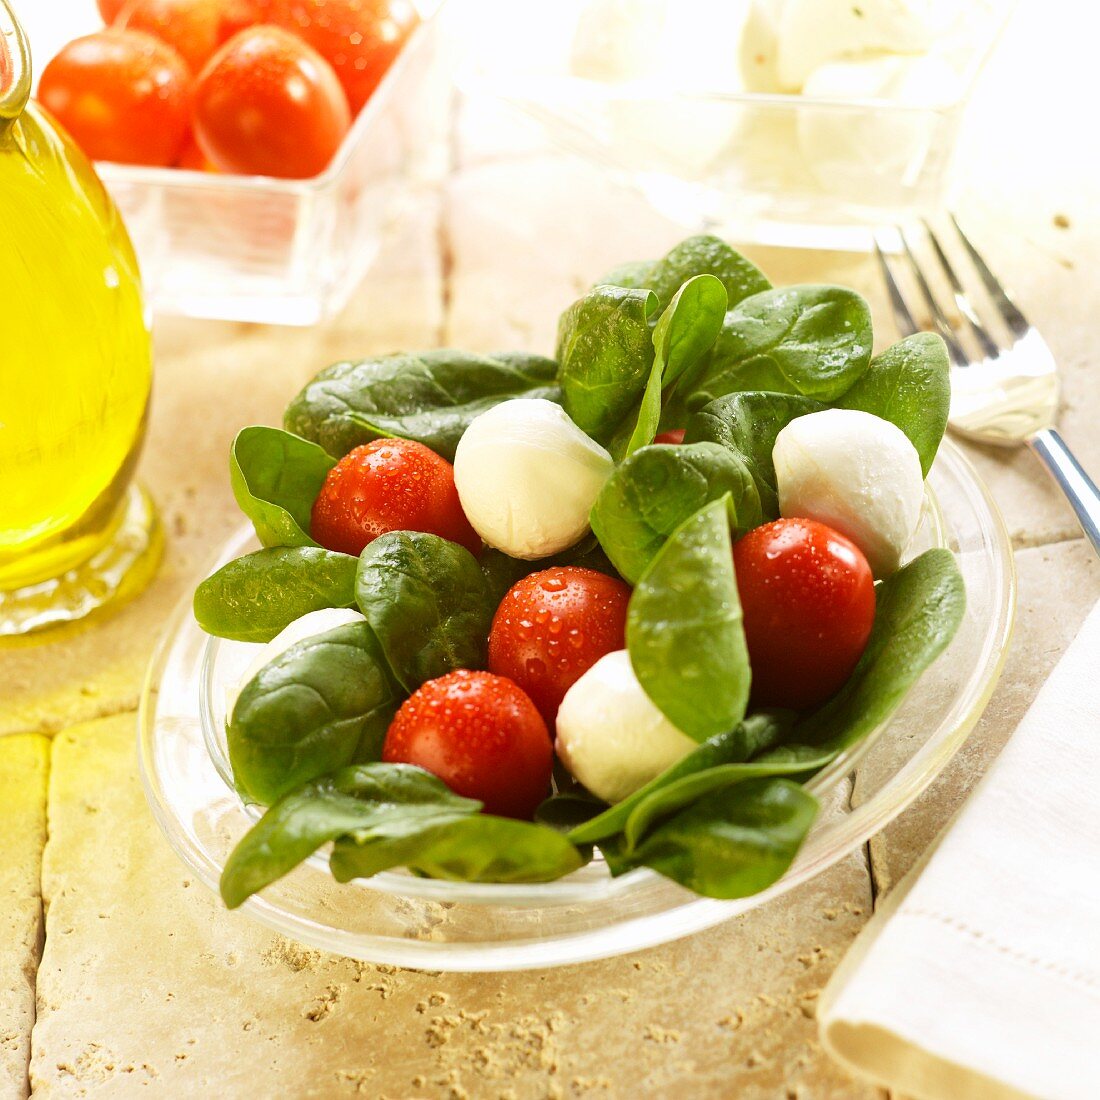 Spinach salad with mozzarella balls, tomatoes and olive oil